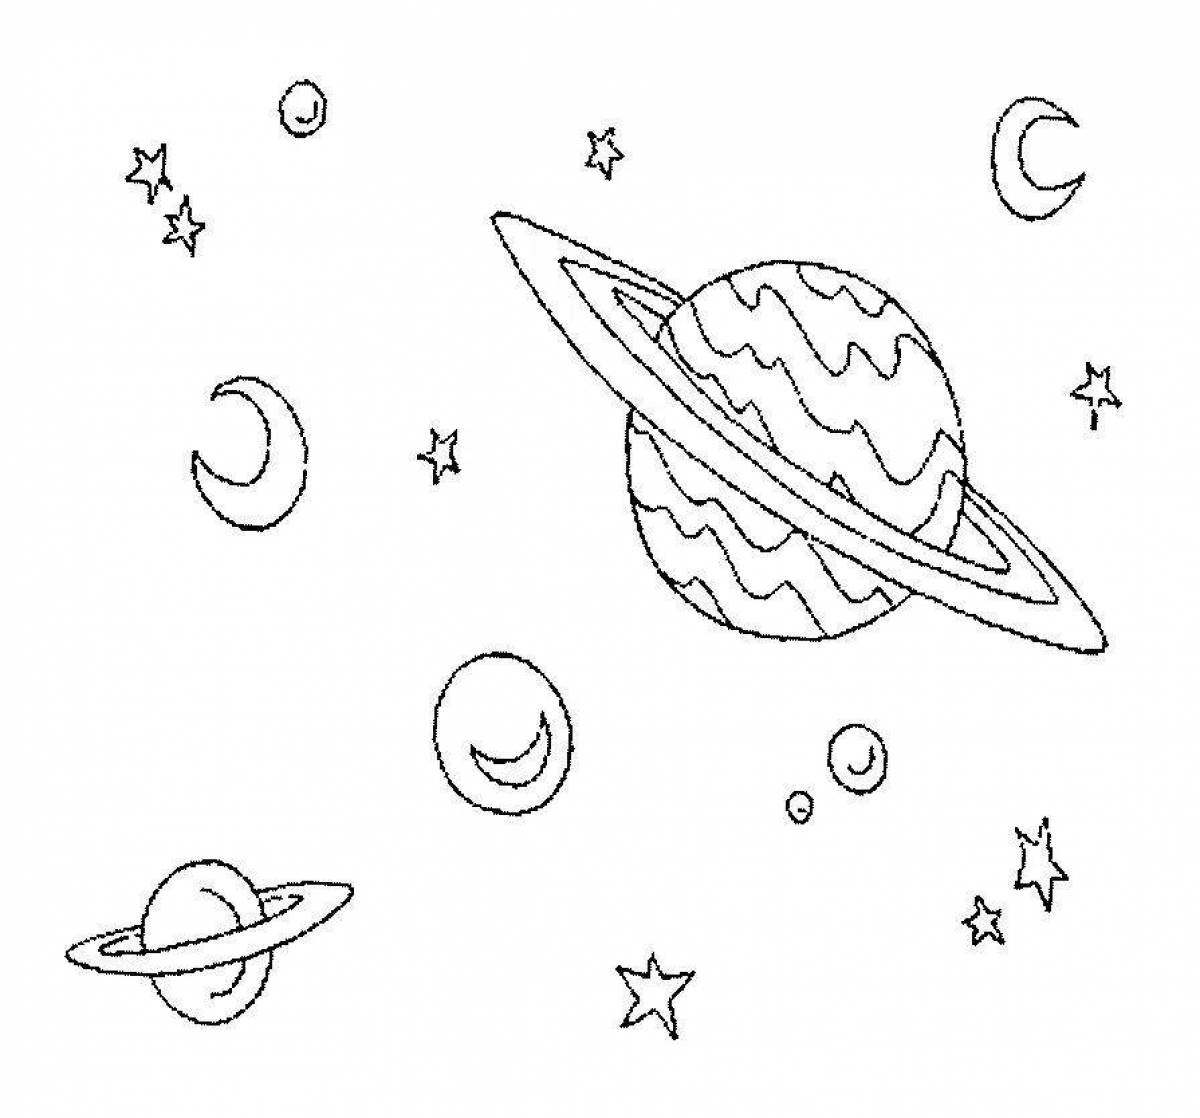 Wonderful space and planets coloring pages for kids